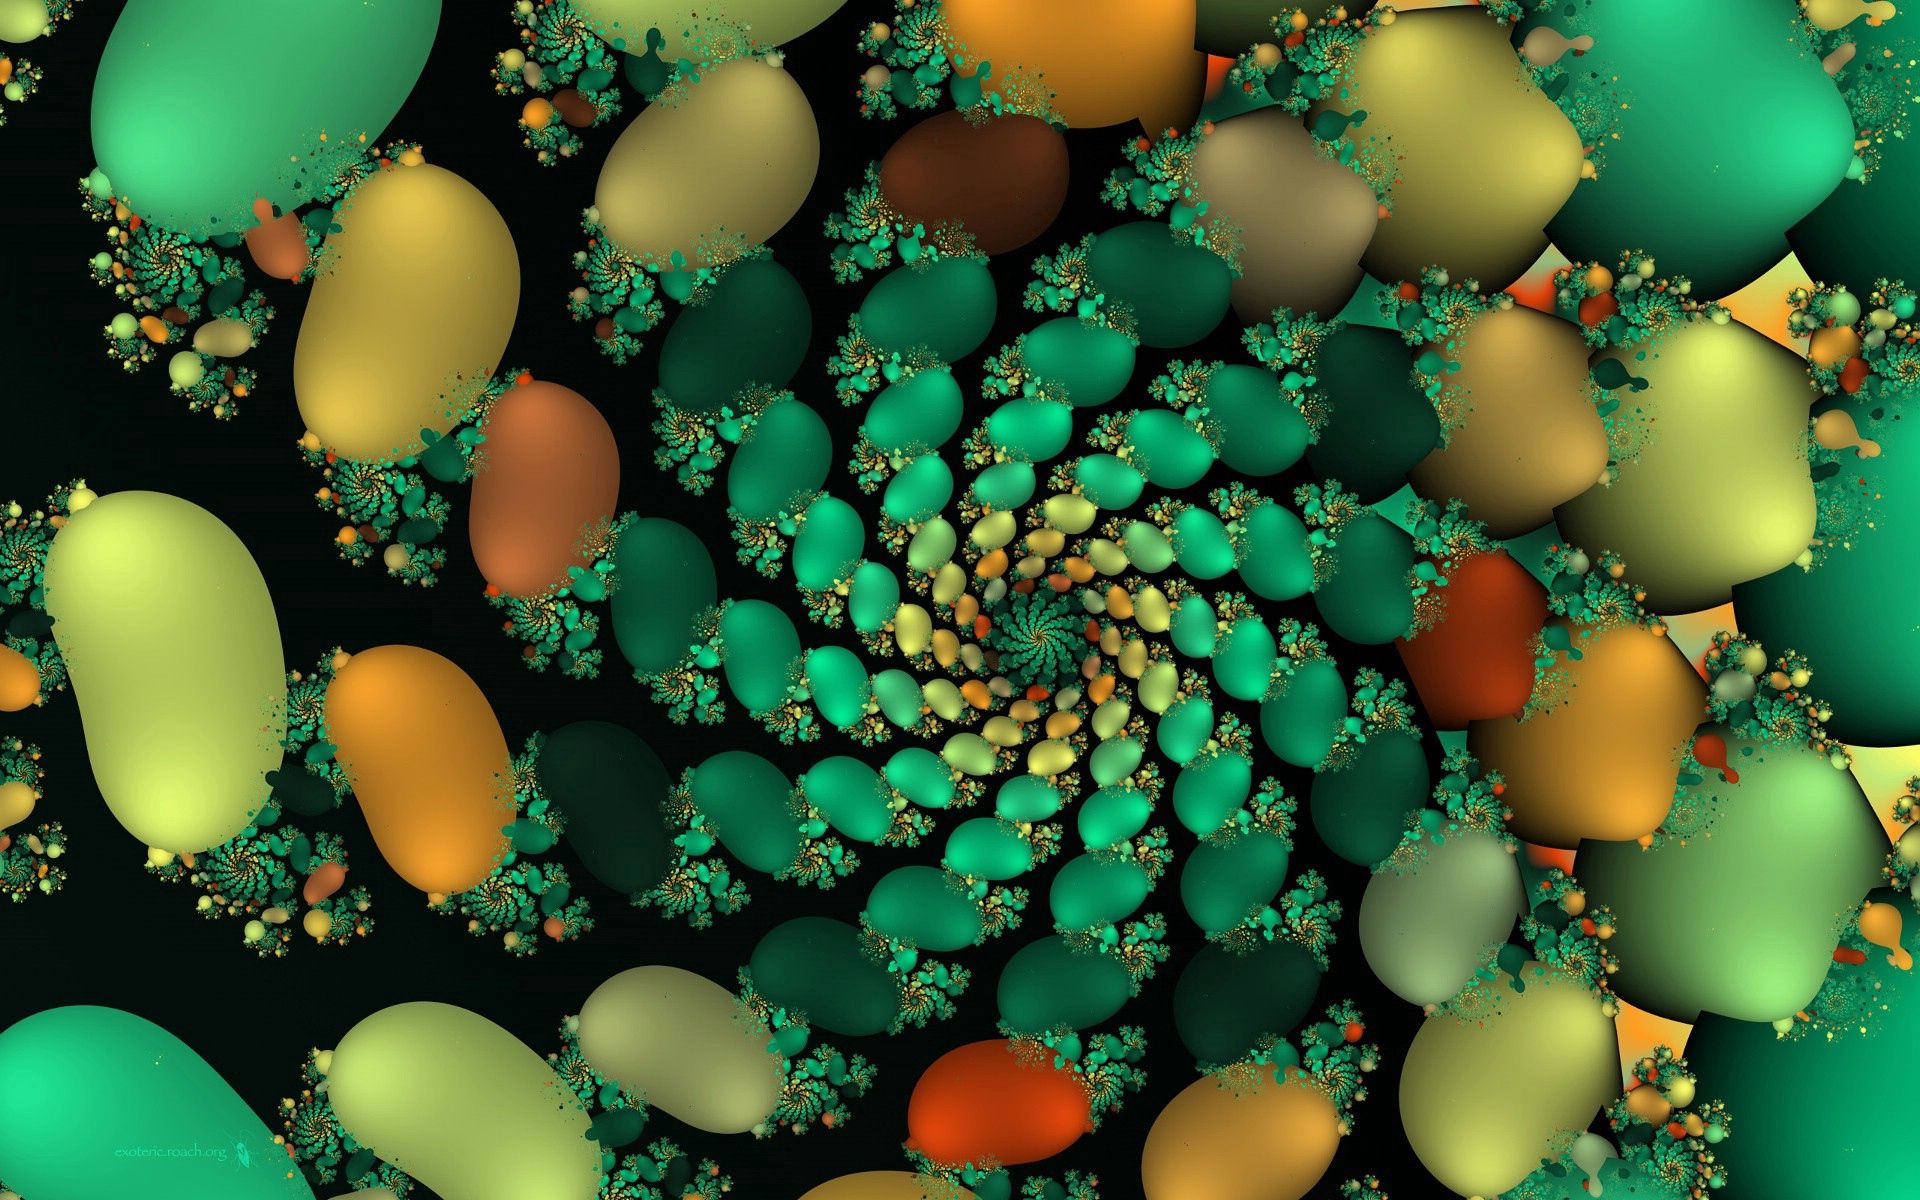 fractal, multicolored, abstract, motley, form, rotation, oval 2160p